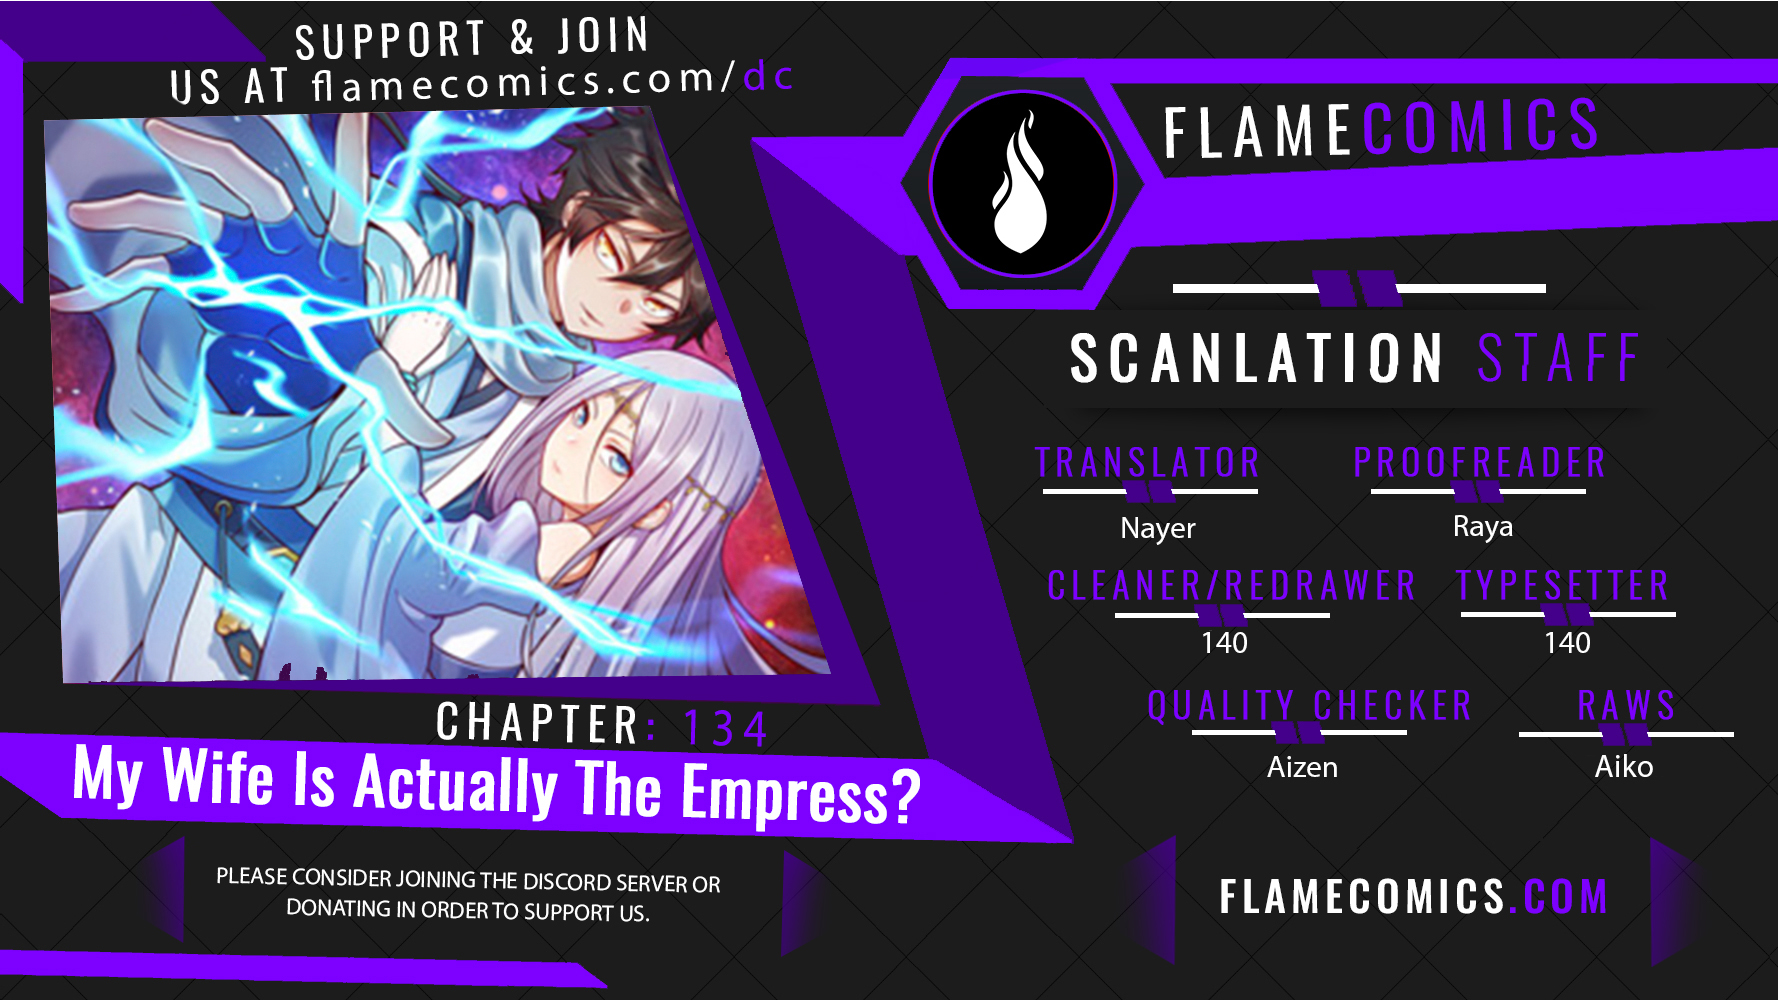 My Wife Is Actually The Empress? - Chapter 30718 - Image 1